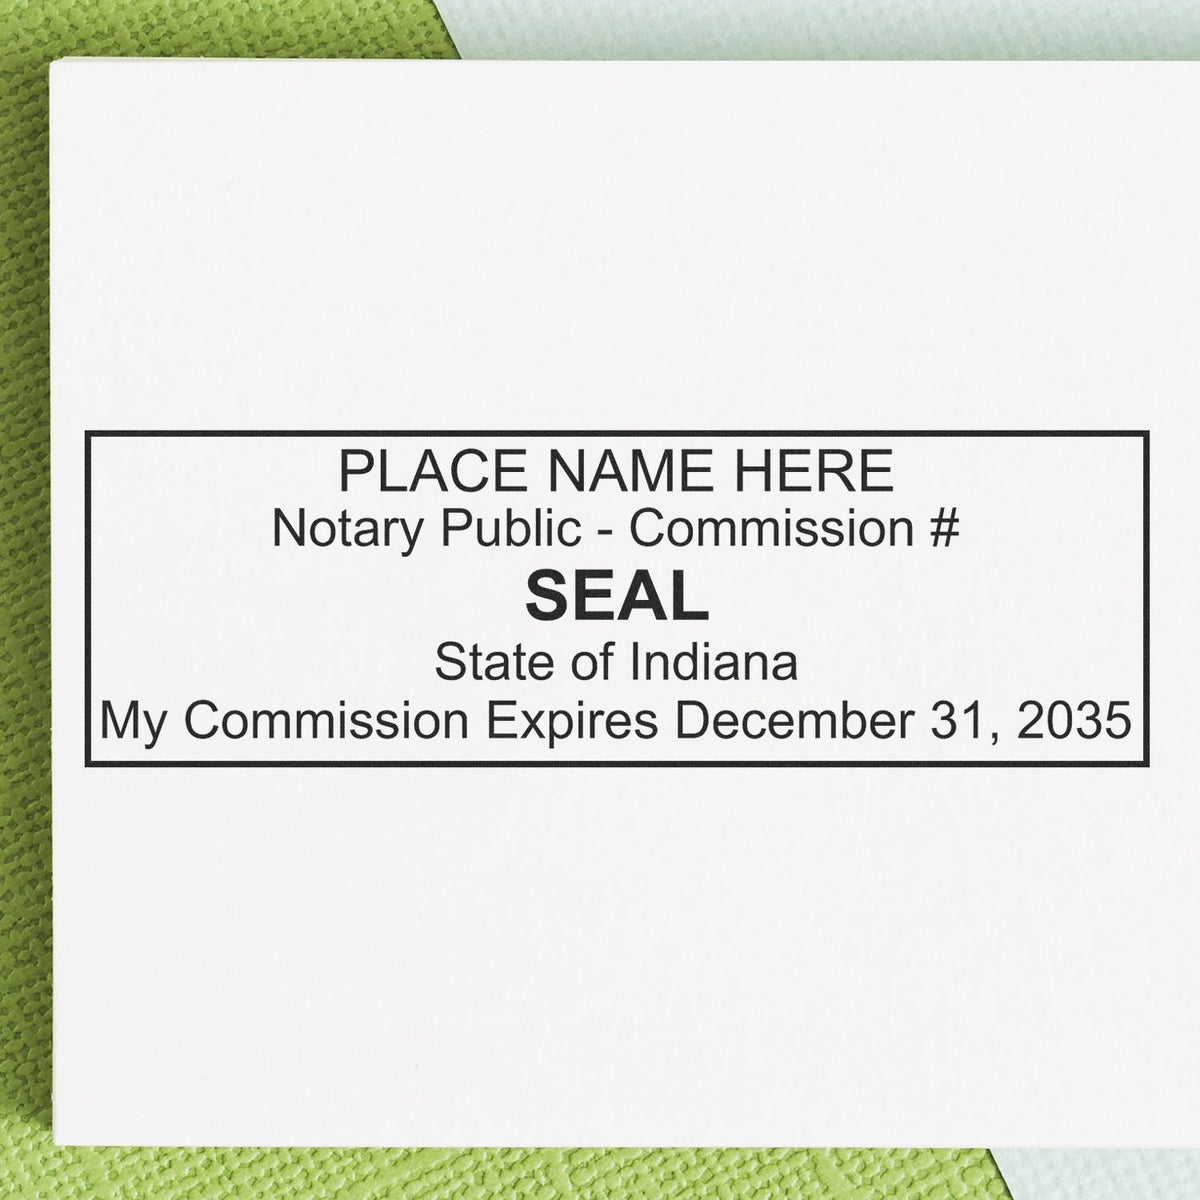 This paper is stamped with a sample imprint of the Super Slim Indiana Notary Public Stamp, signifying its quality and reliability.